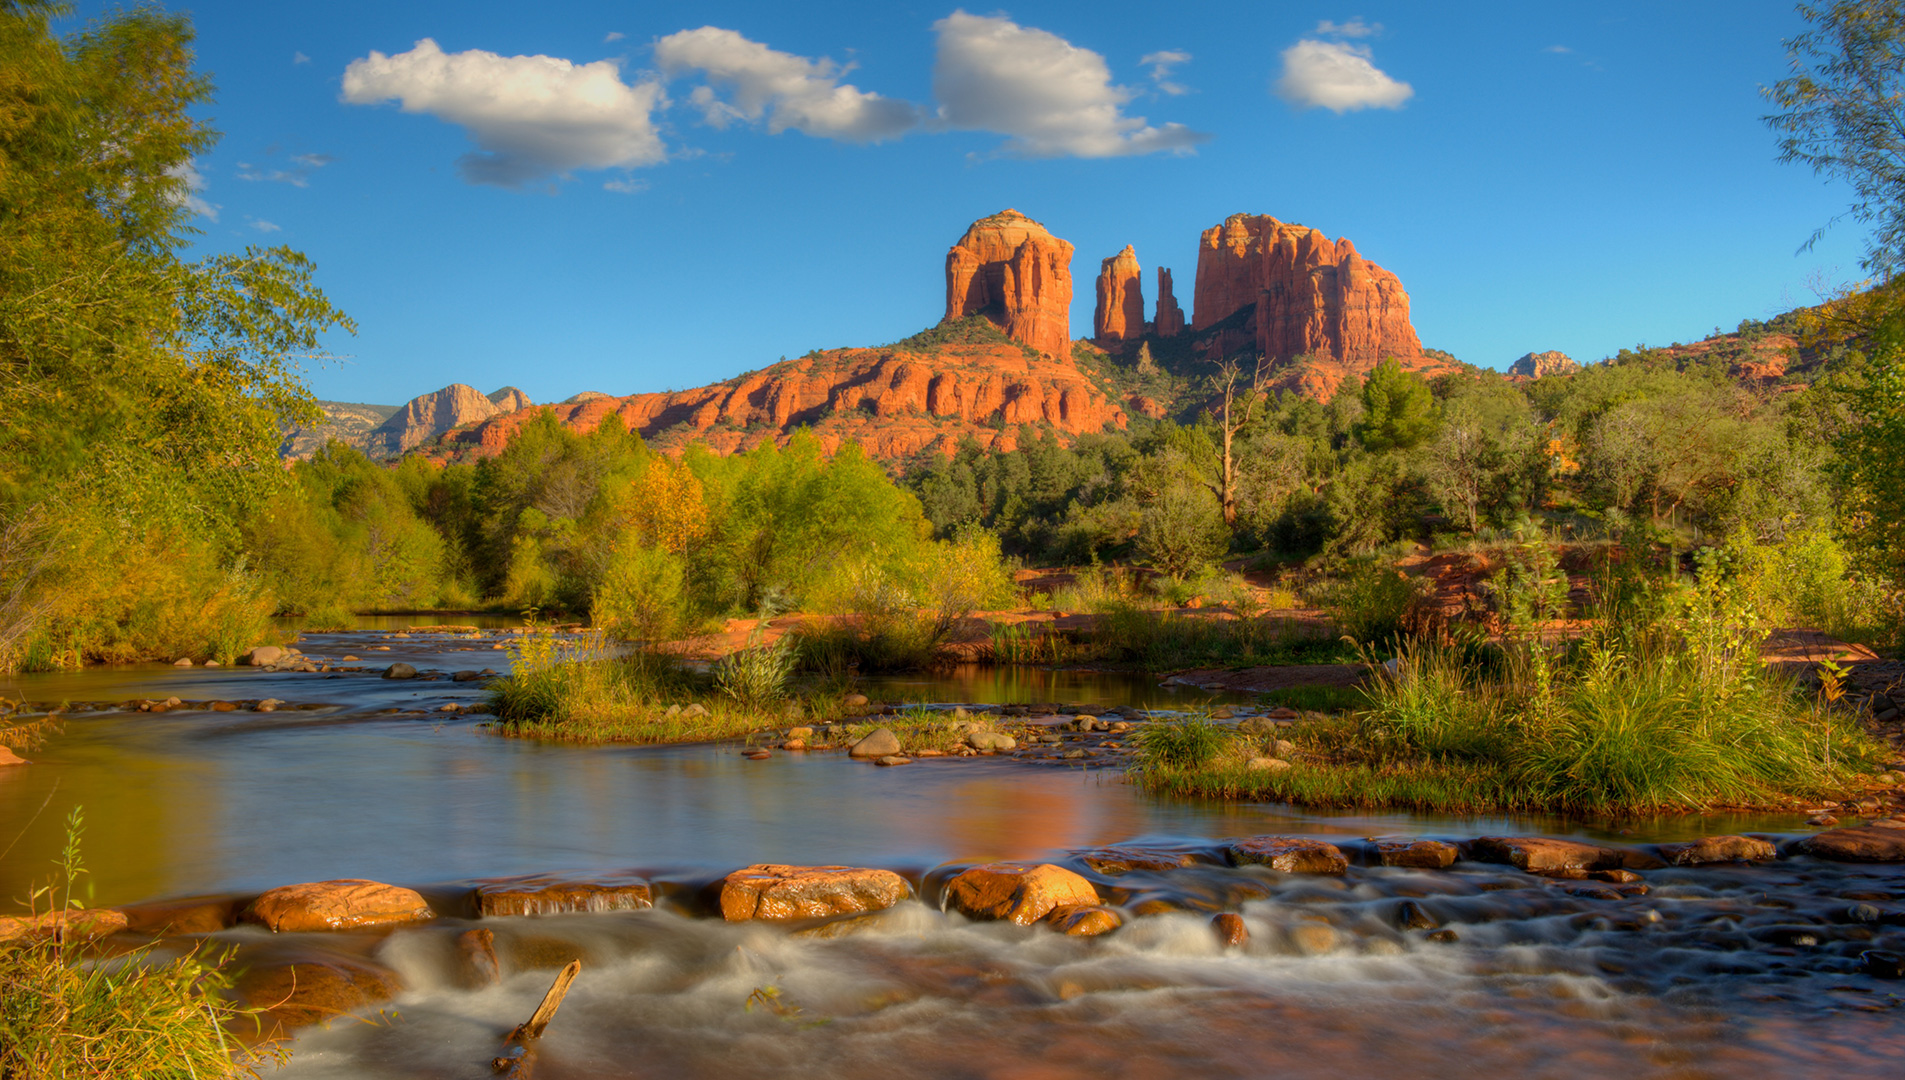 Soaring red rock bluffs rise from the placid water of Oak Creek in Sedona’s Red Rock country.